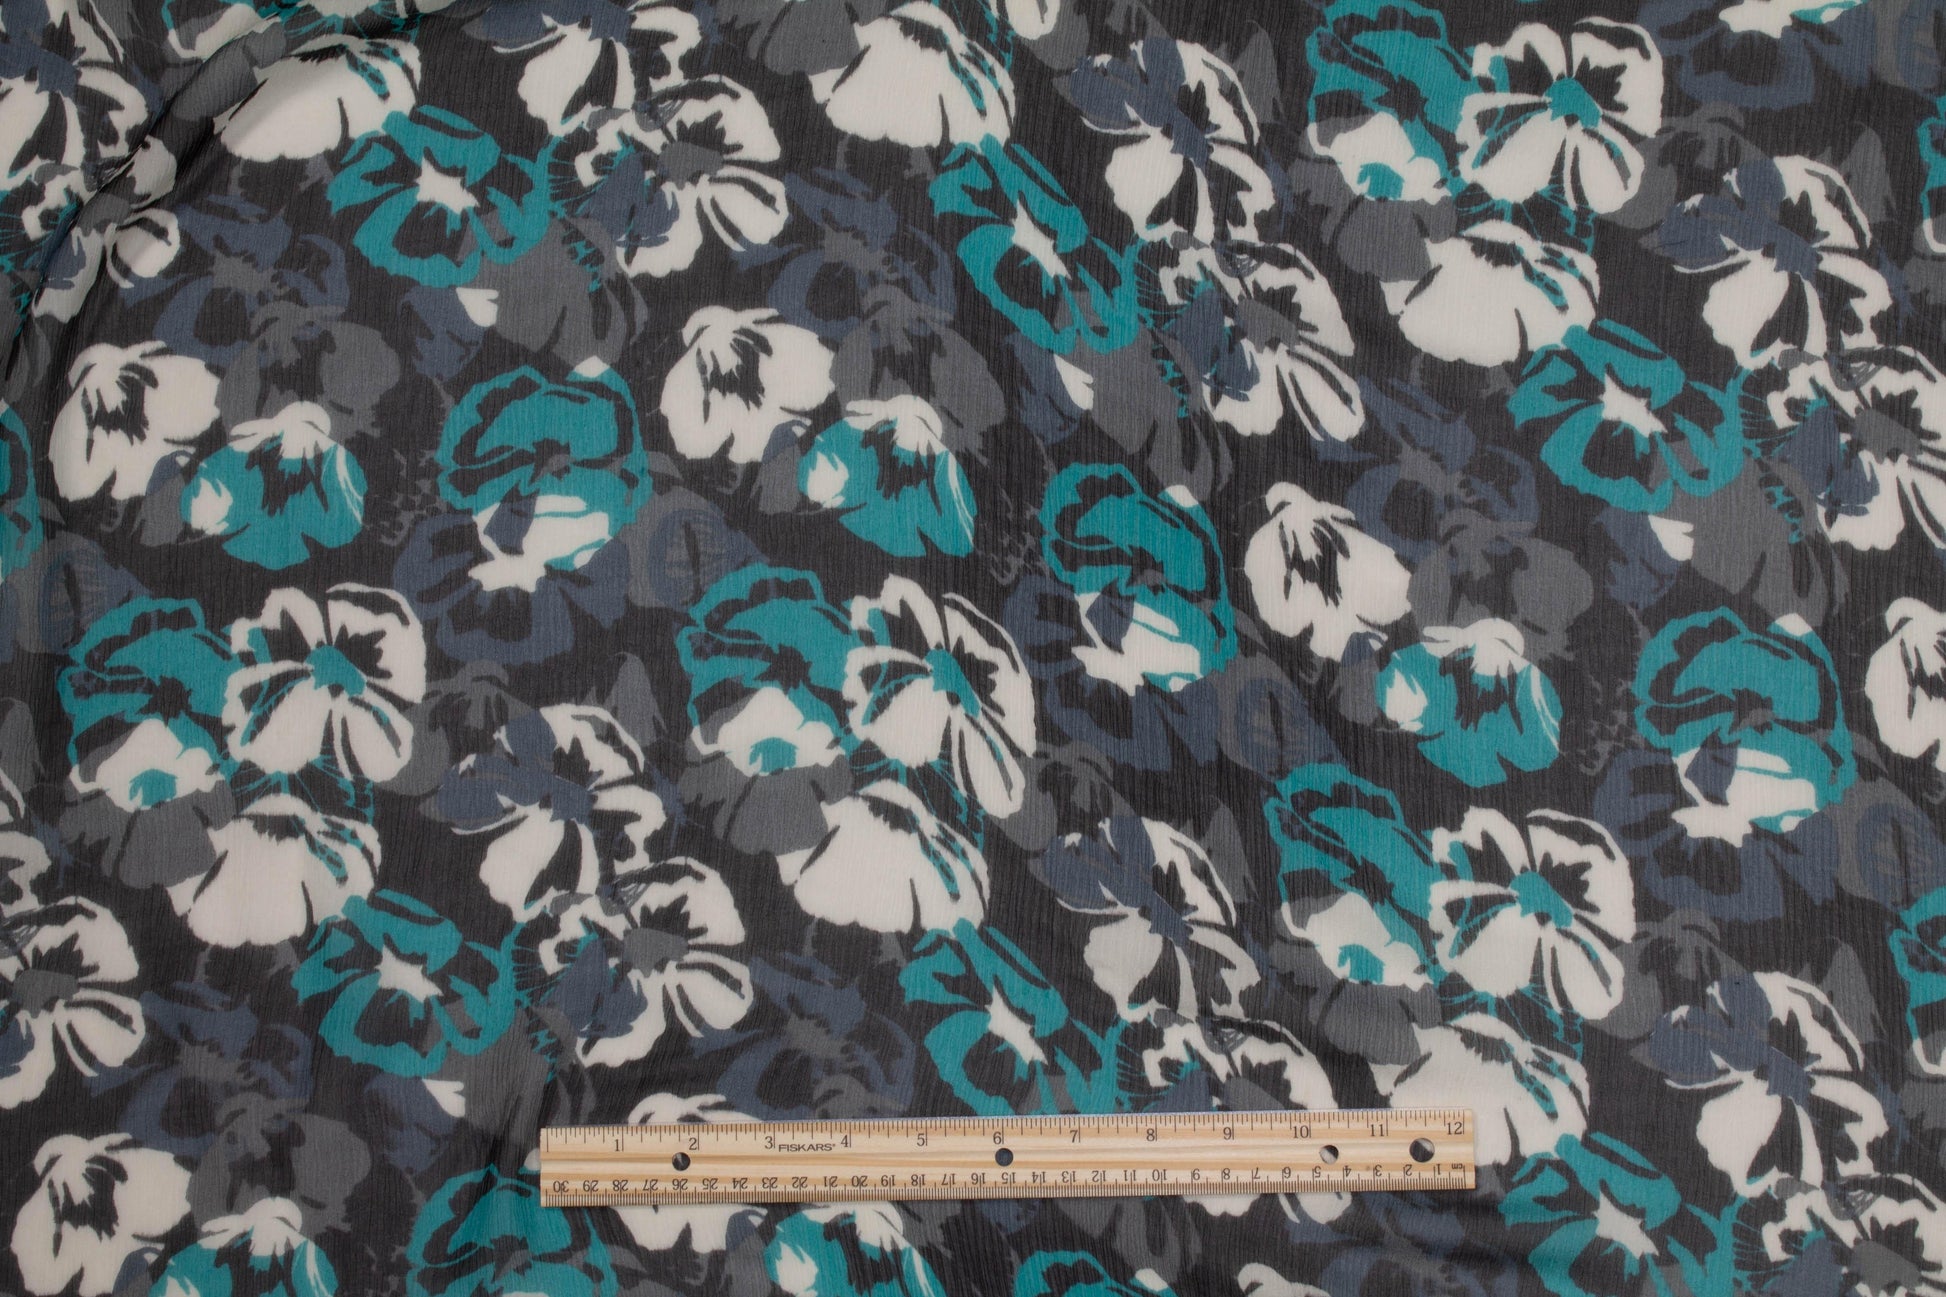 Floral Crushed Silk Chiffon - Teal, Gray, White - Prime Fabrics